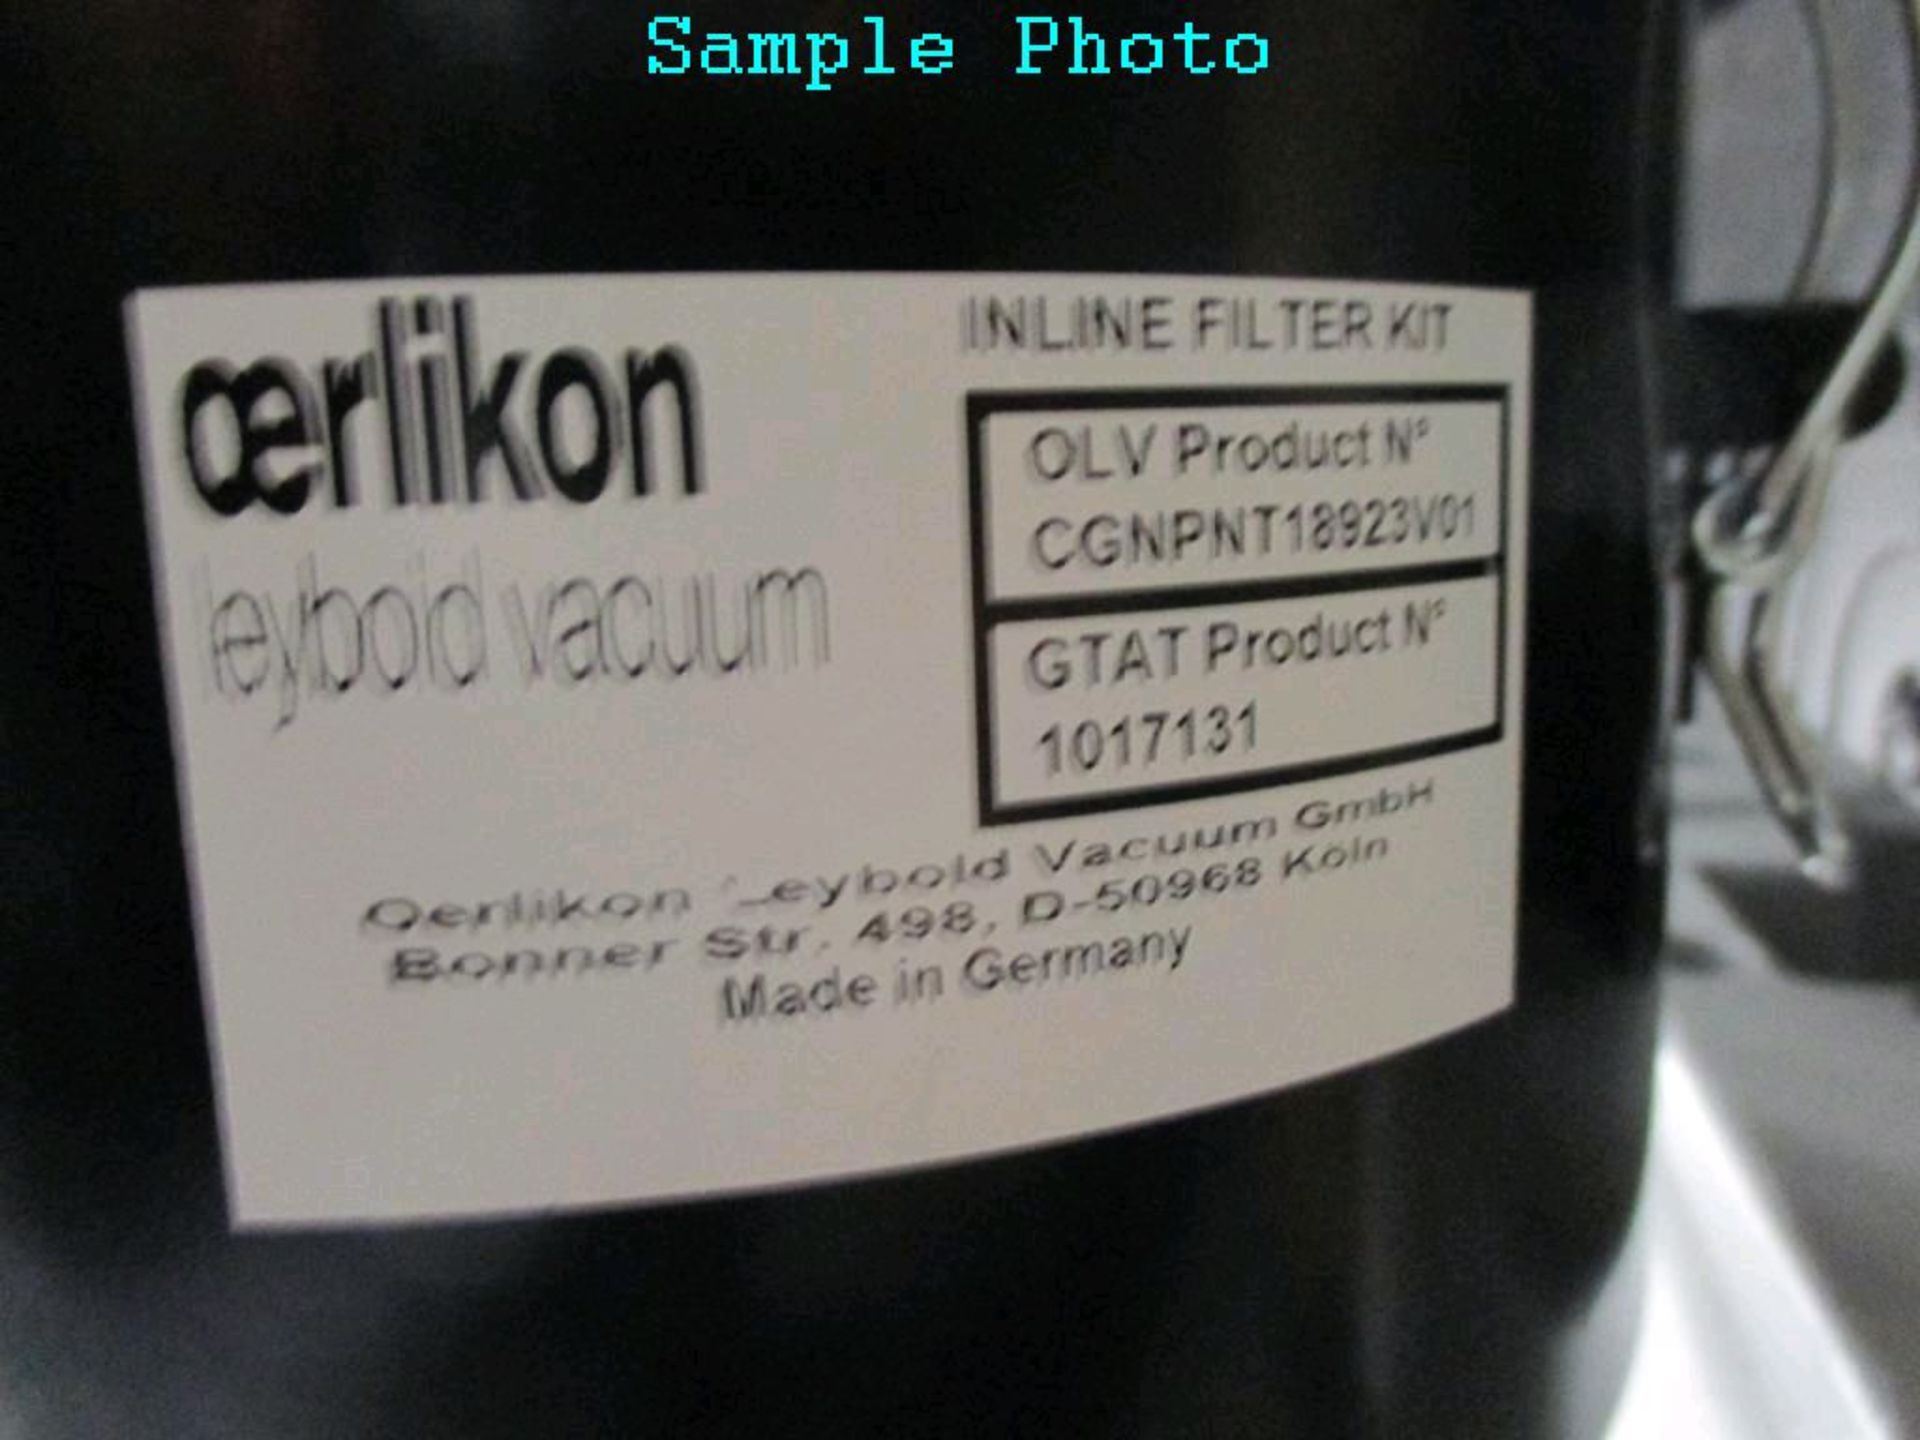 Oerlikon Leybold D65B Lot Includes (1) Trivac D65B Vacuum Pump (mfg. 2014). Asset Located at 3WAY - Image 8 of 8